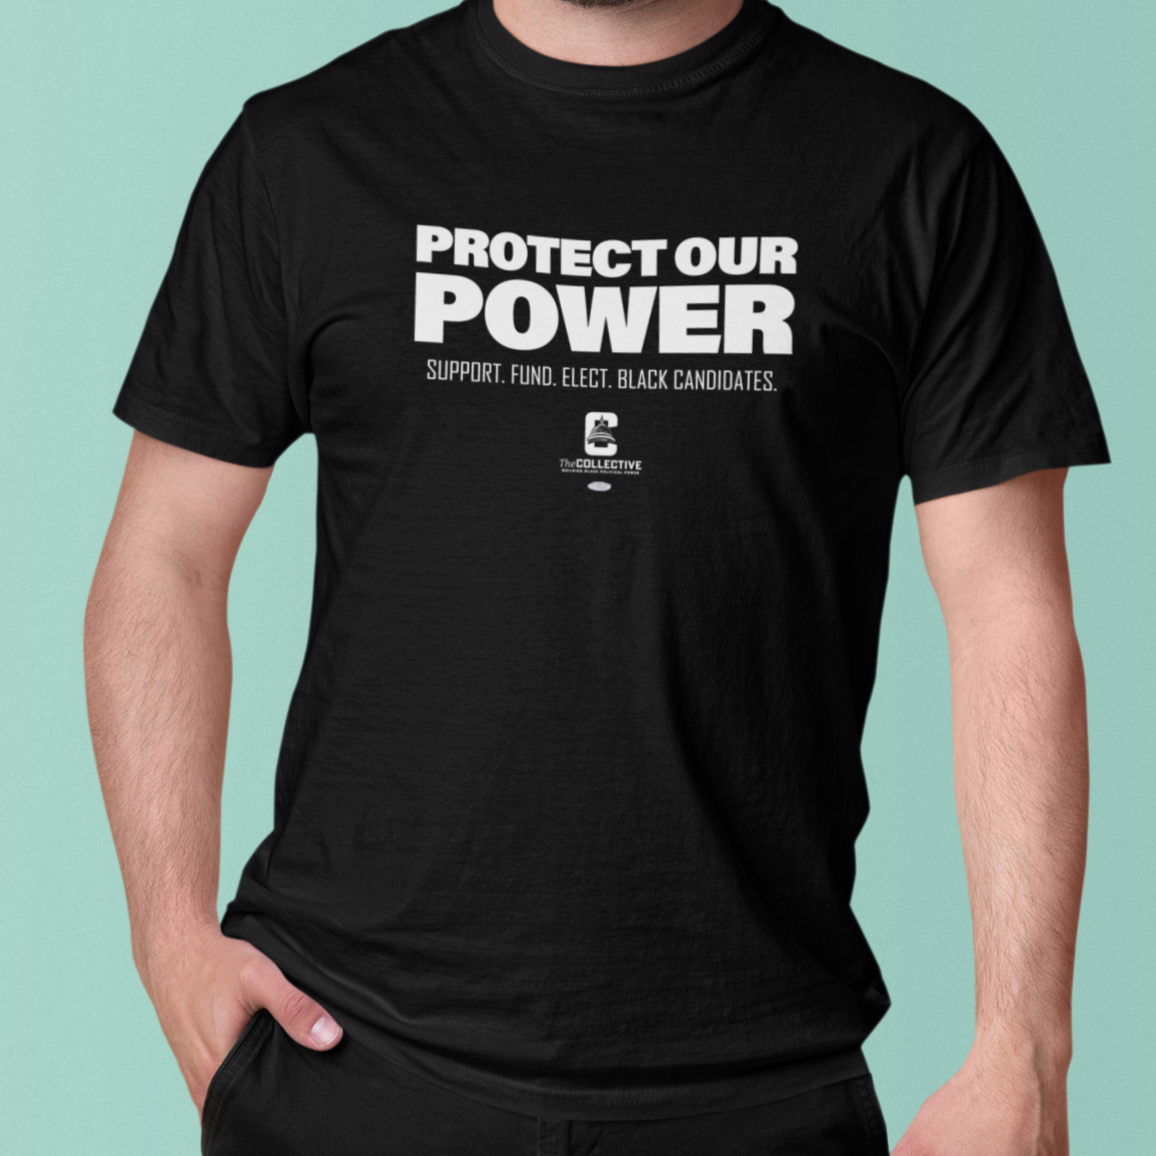 PROTECT OUR POWER TEE